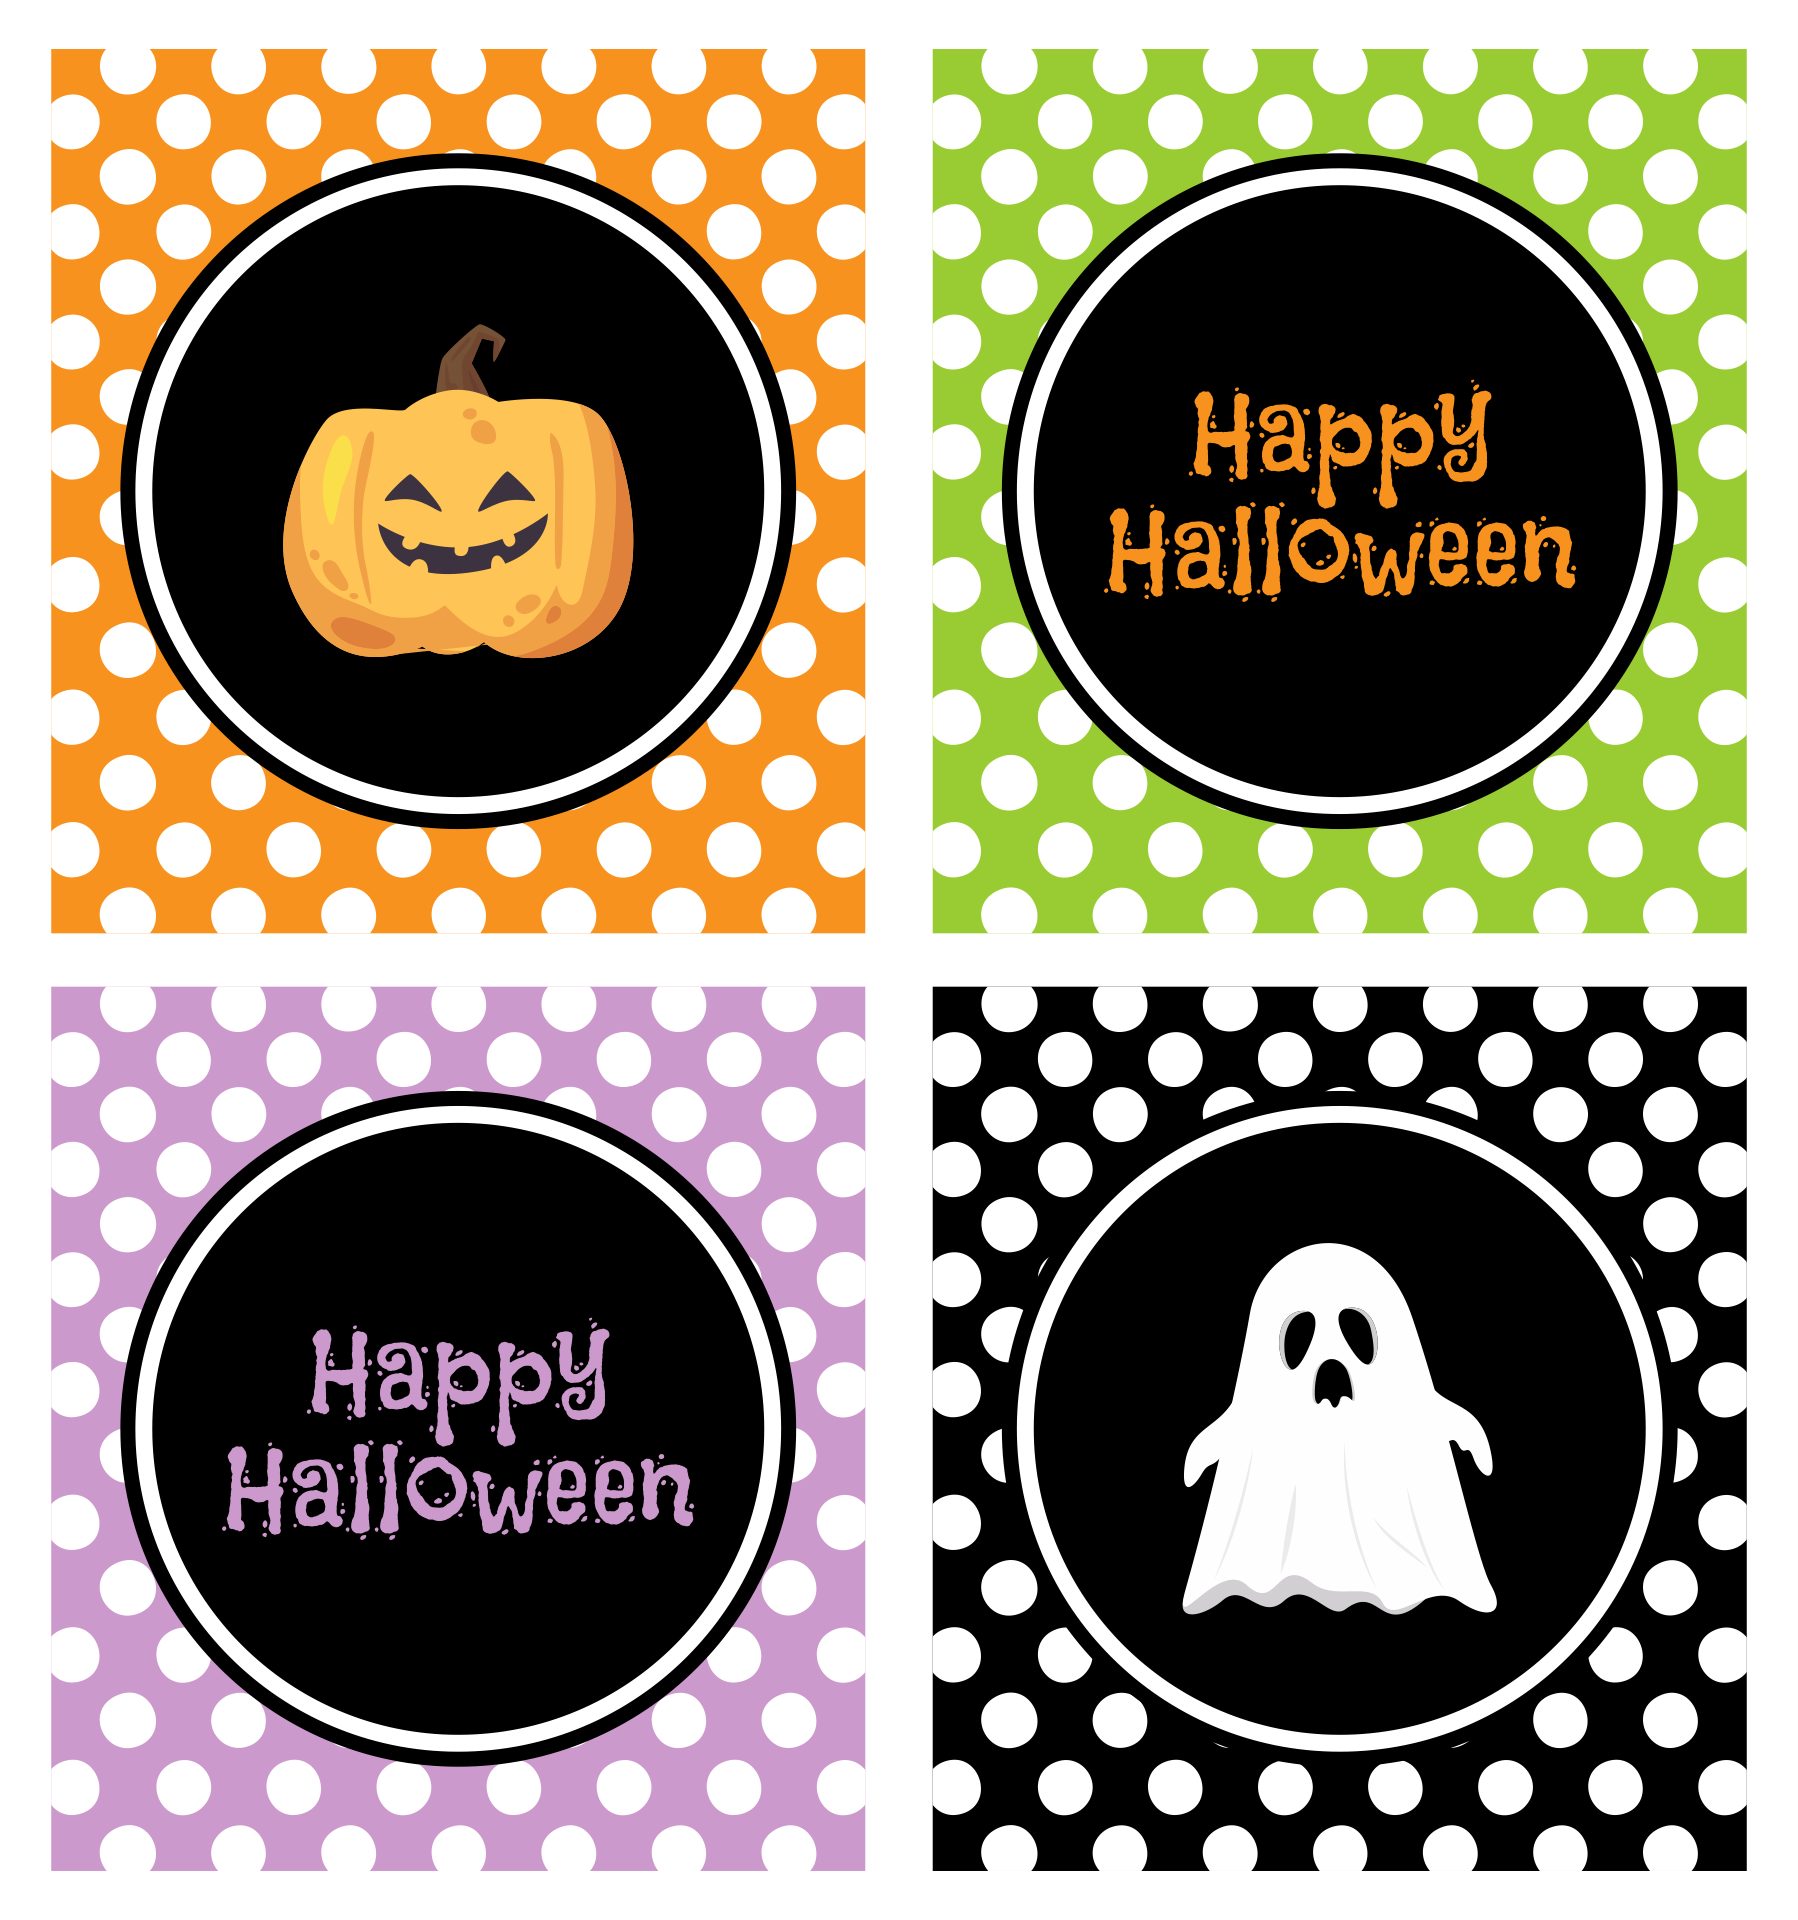 7 Best Images of Happy Halloween Free Printable Labels Happy